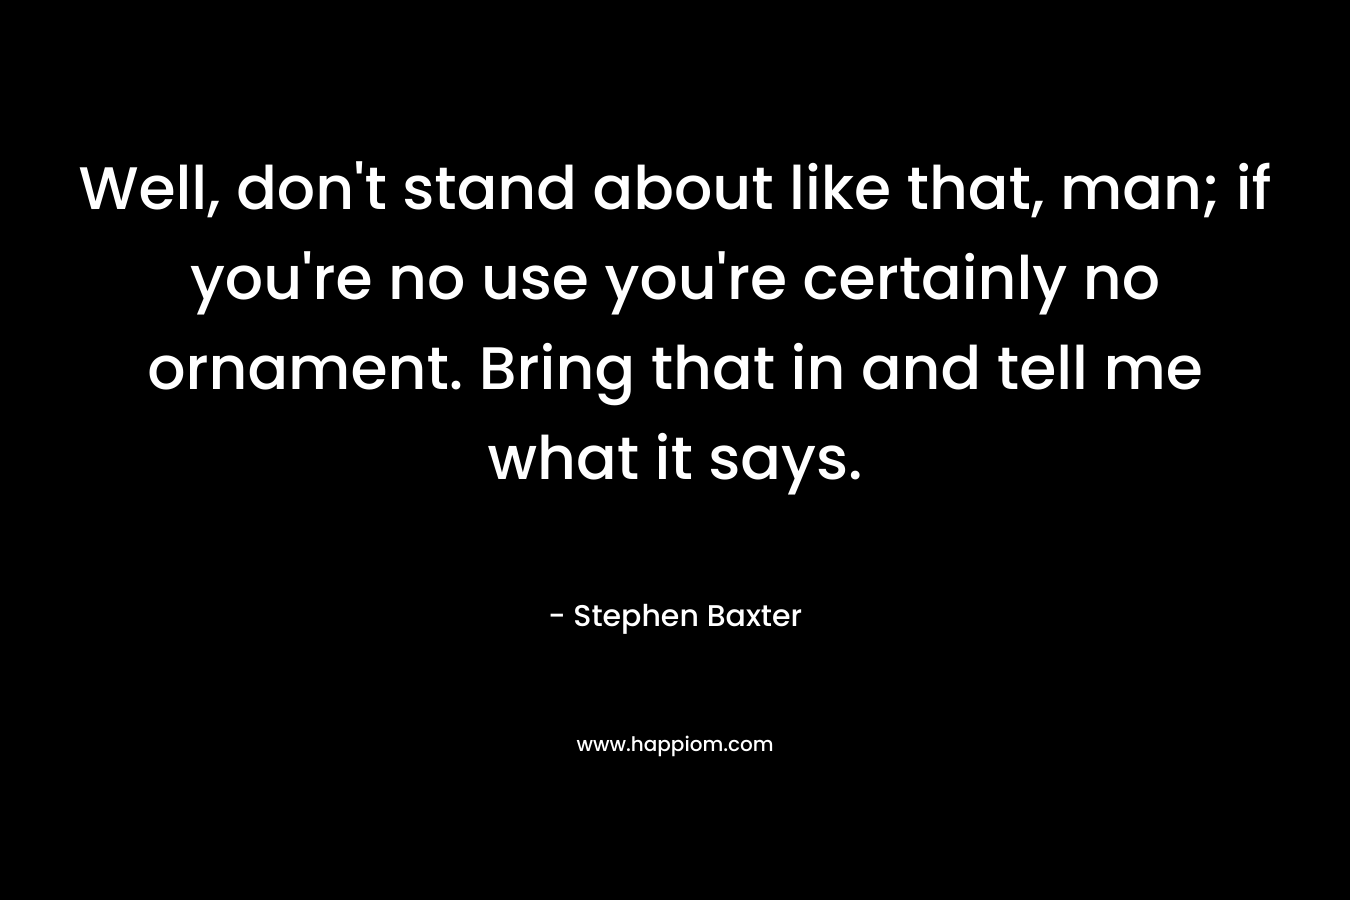 Well, don’t stand about like that, man; if you’re no use you’re certainly no ornament. Bring that in and tell me what it says. – Stephen Baxter